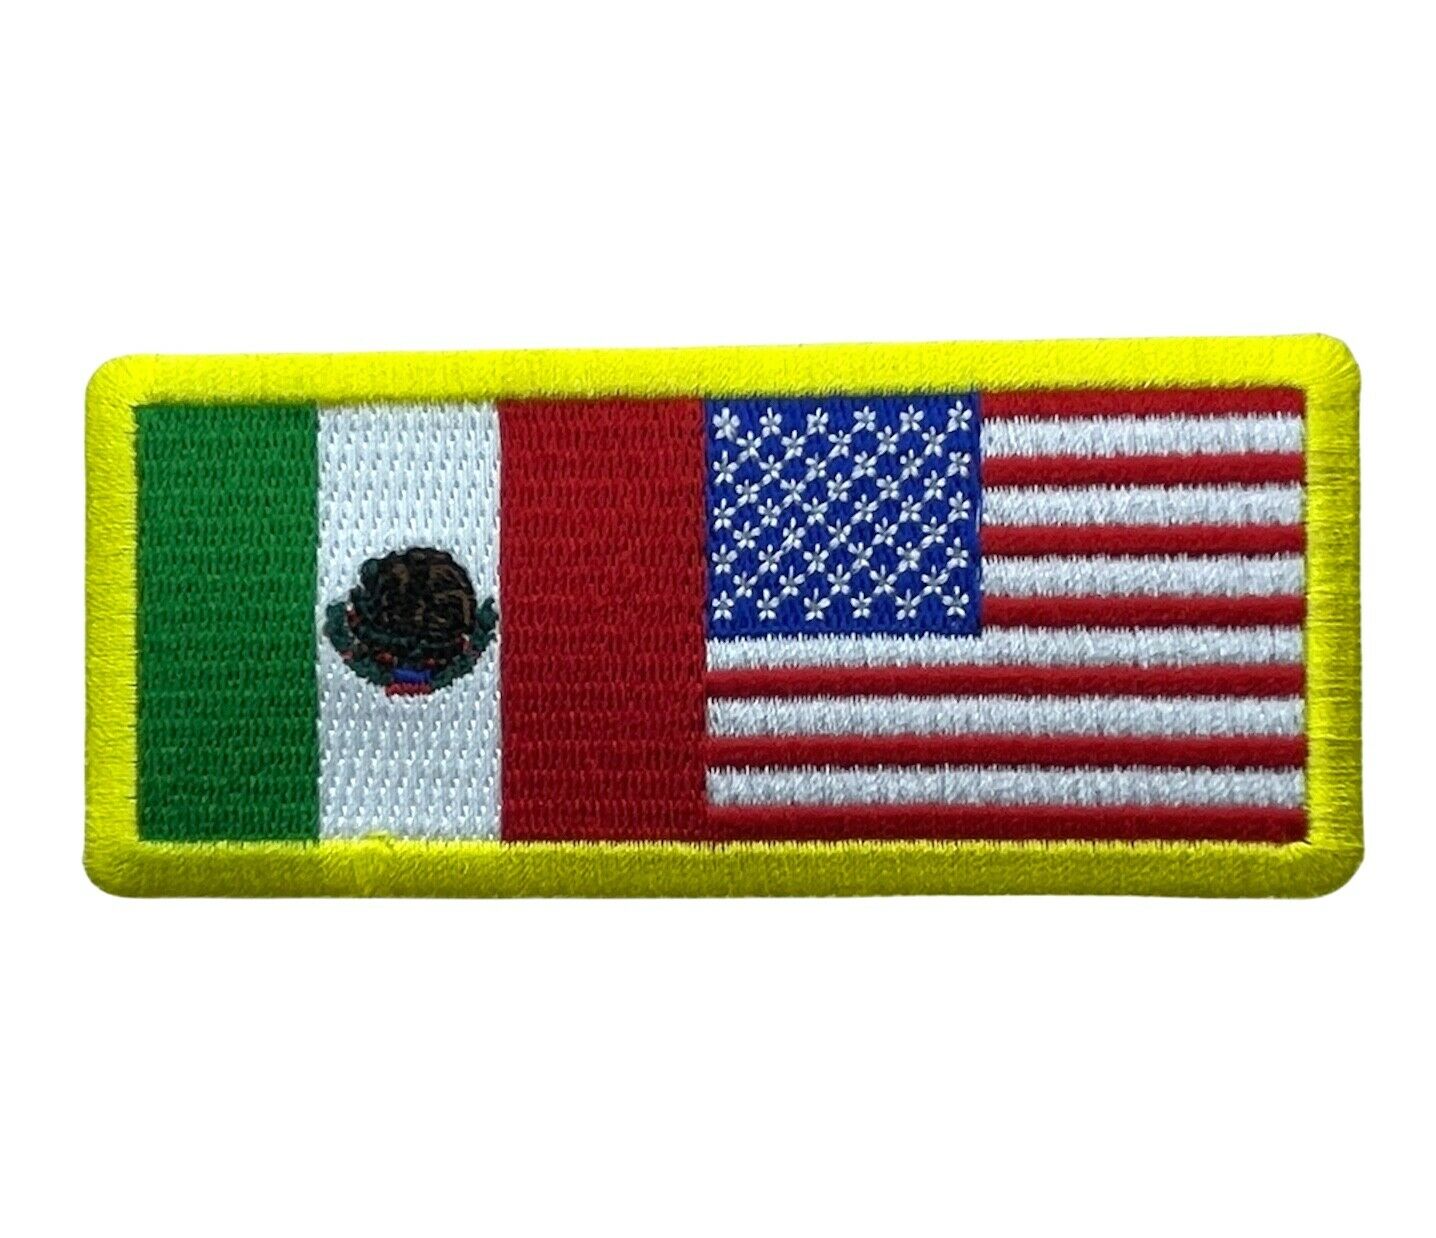 Mexico American Flag Embroidered 4 Inch Patch Iv1267 F5d31g